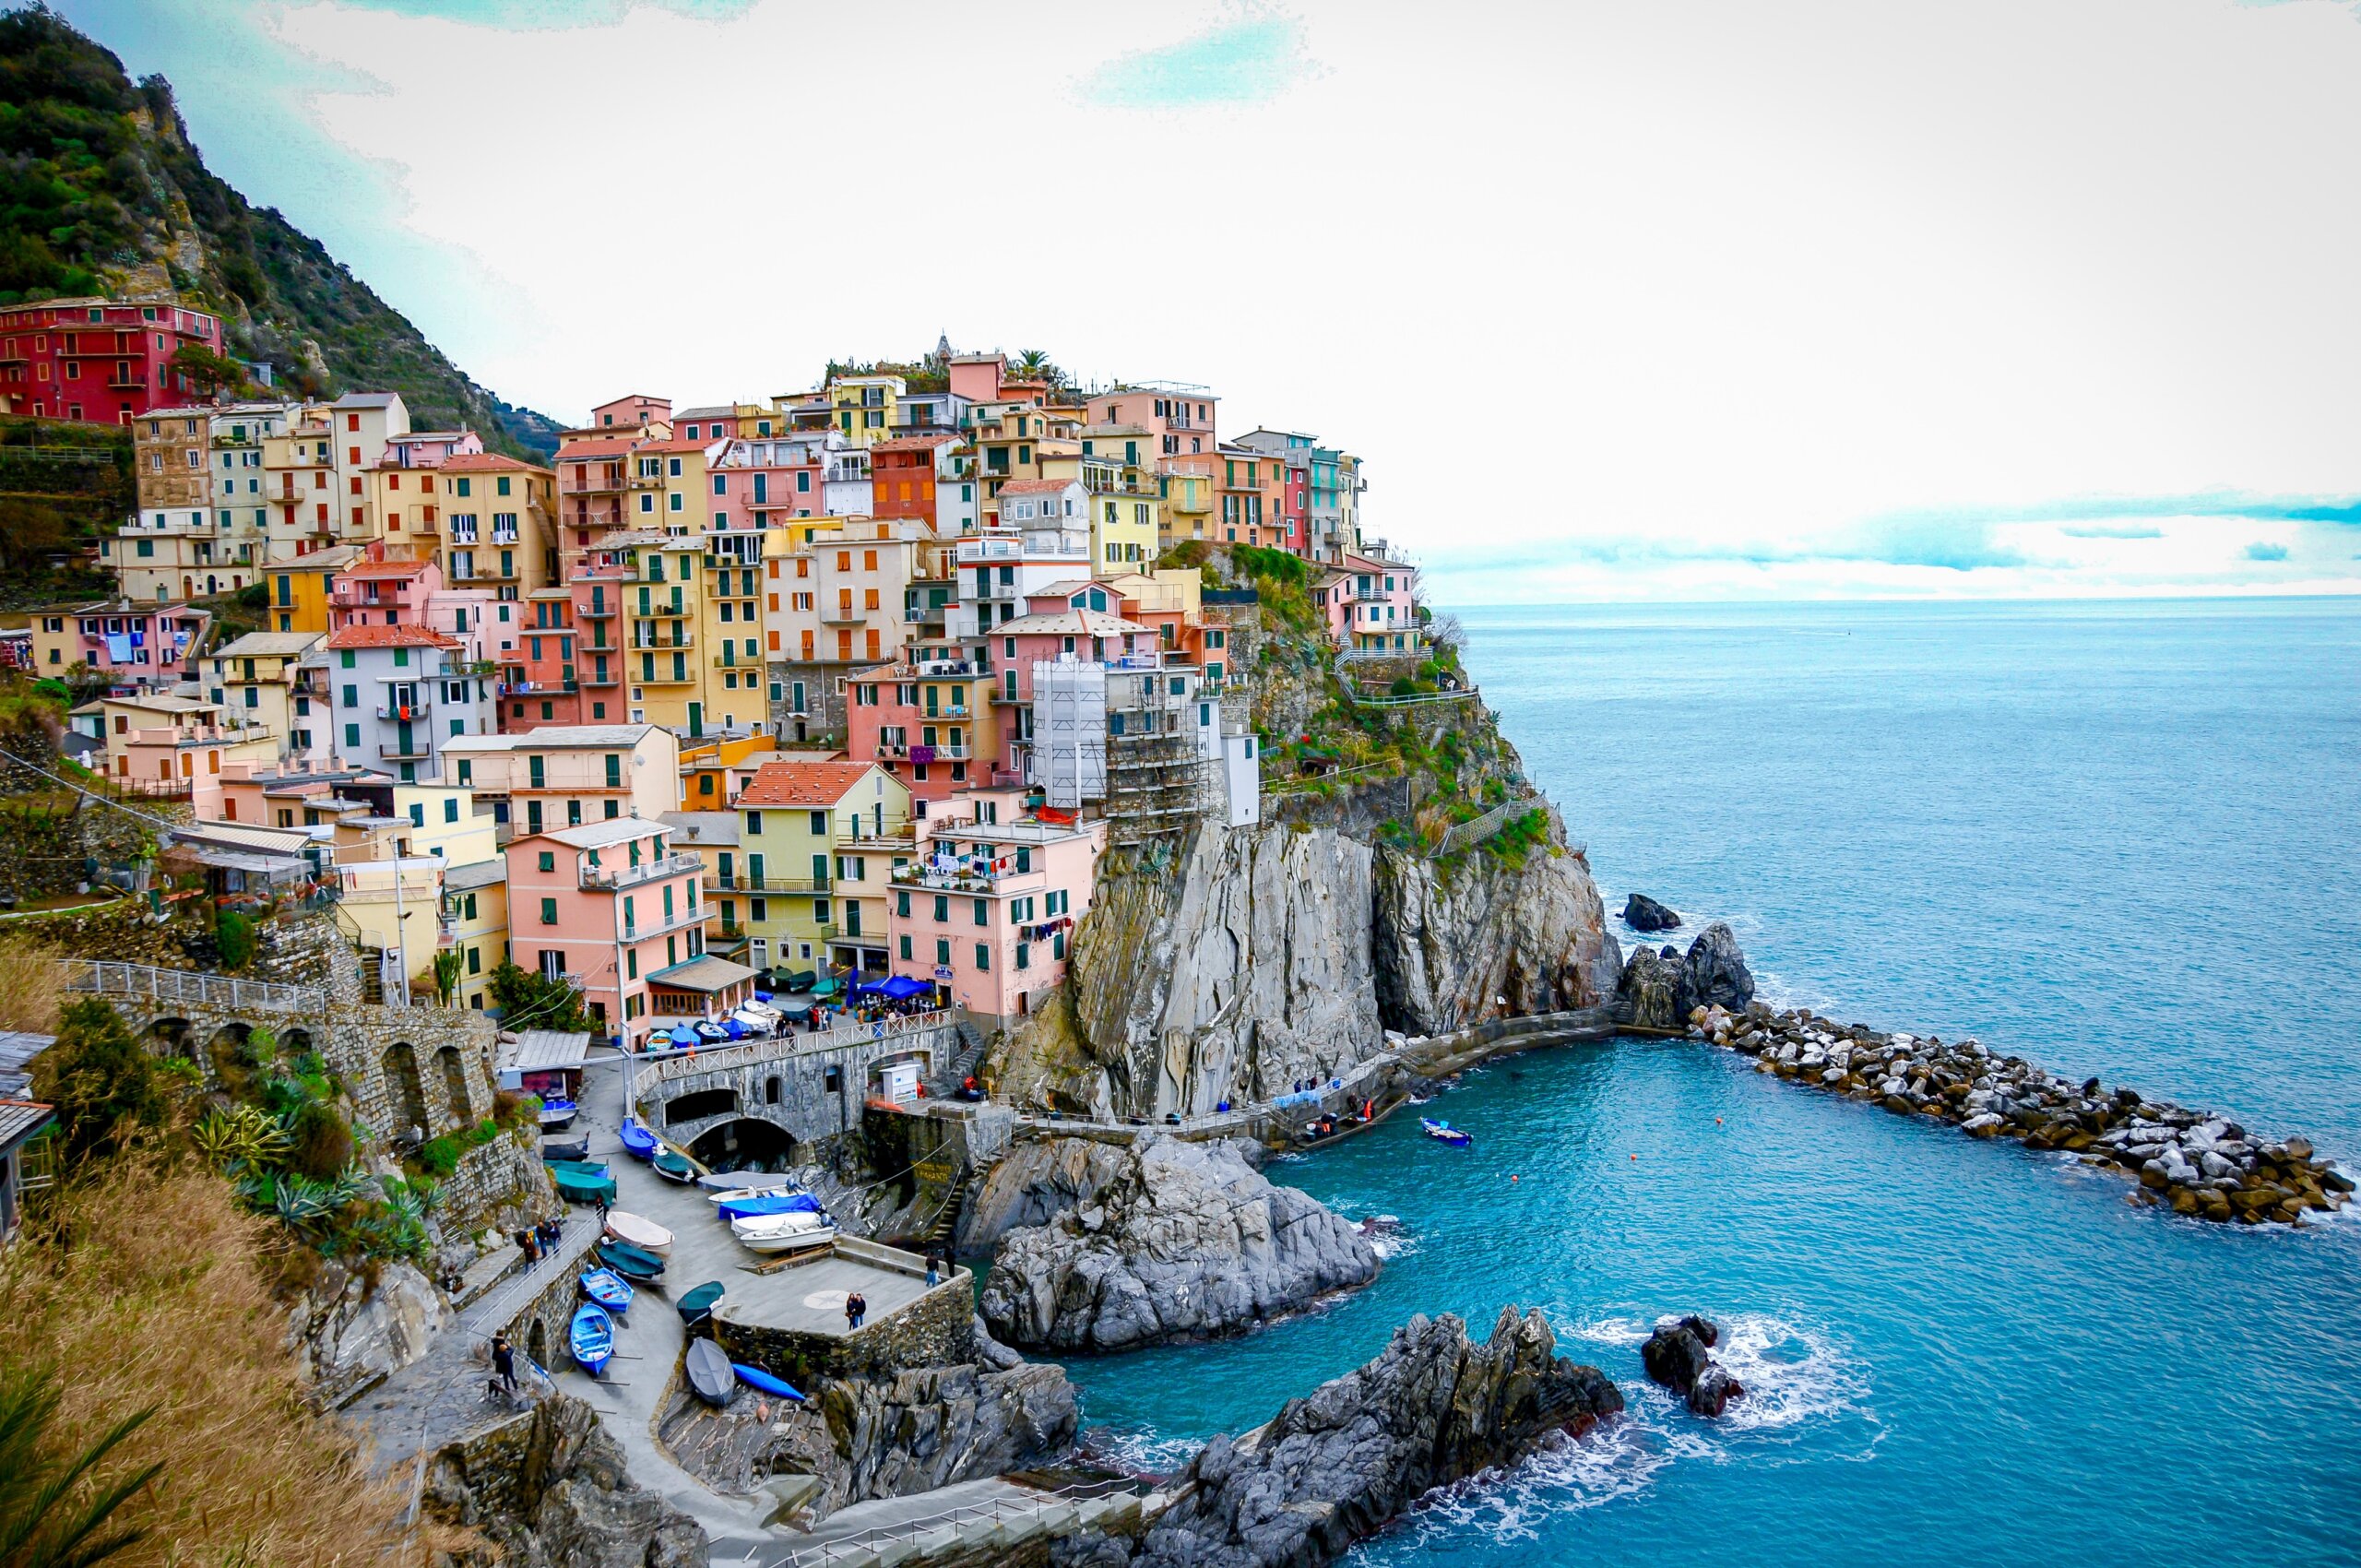 Town of bright colored houses set on cliff with blue water surrounding it